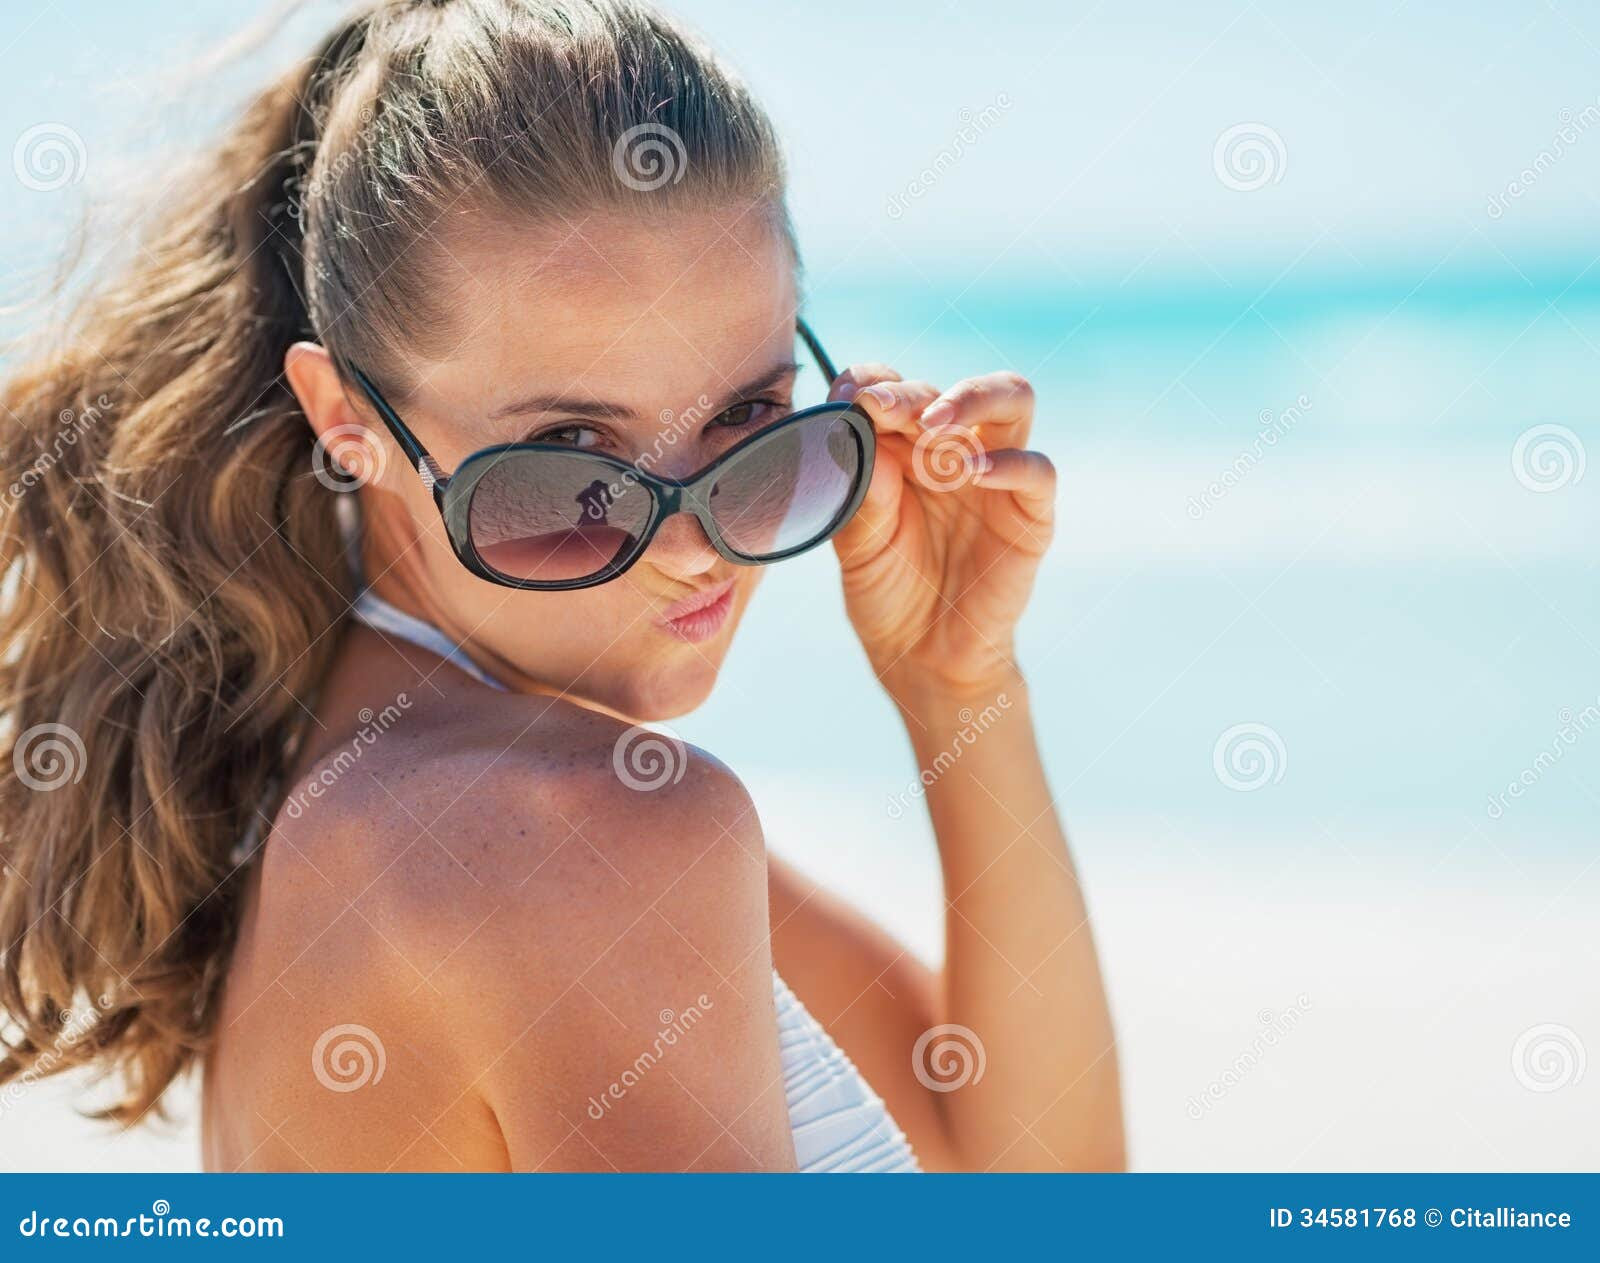 Portrait Of Young Woman  In Swimsuit On Beach  Making Funny  